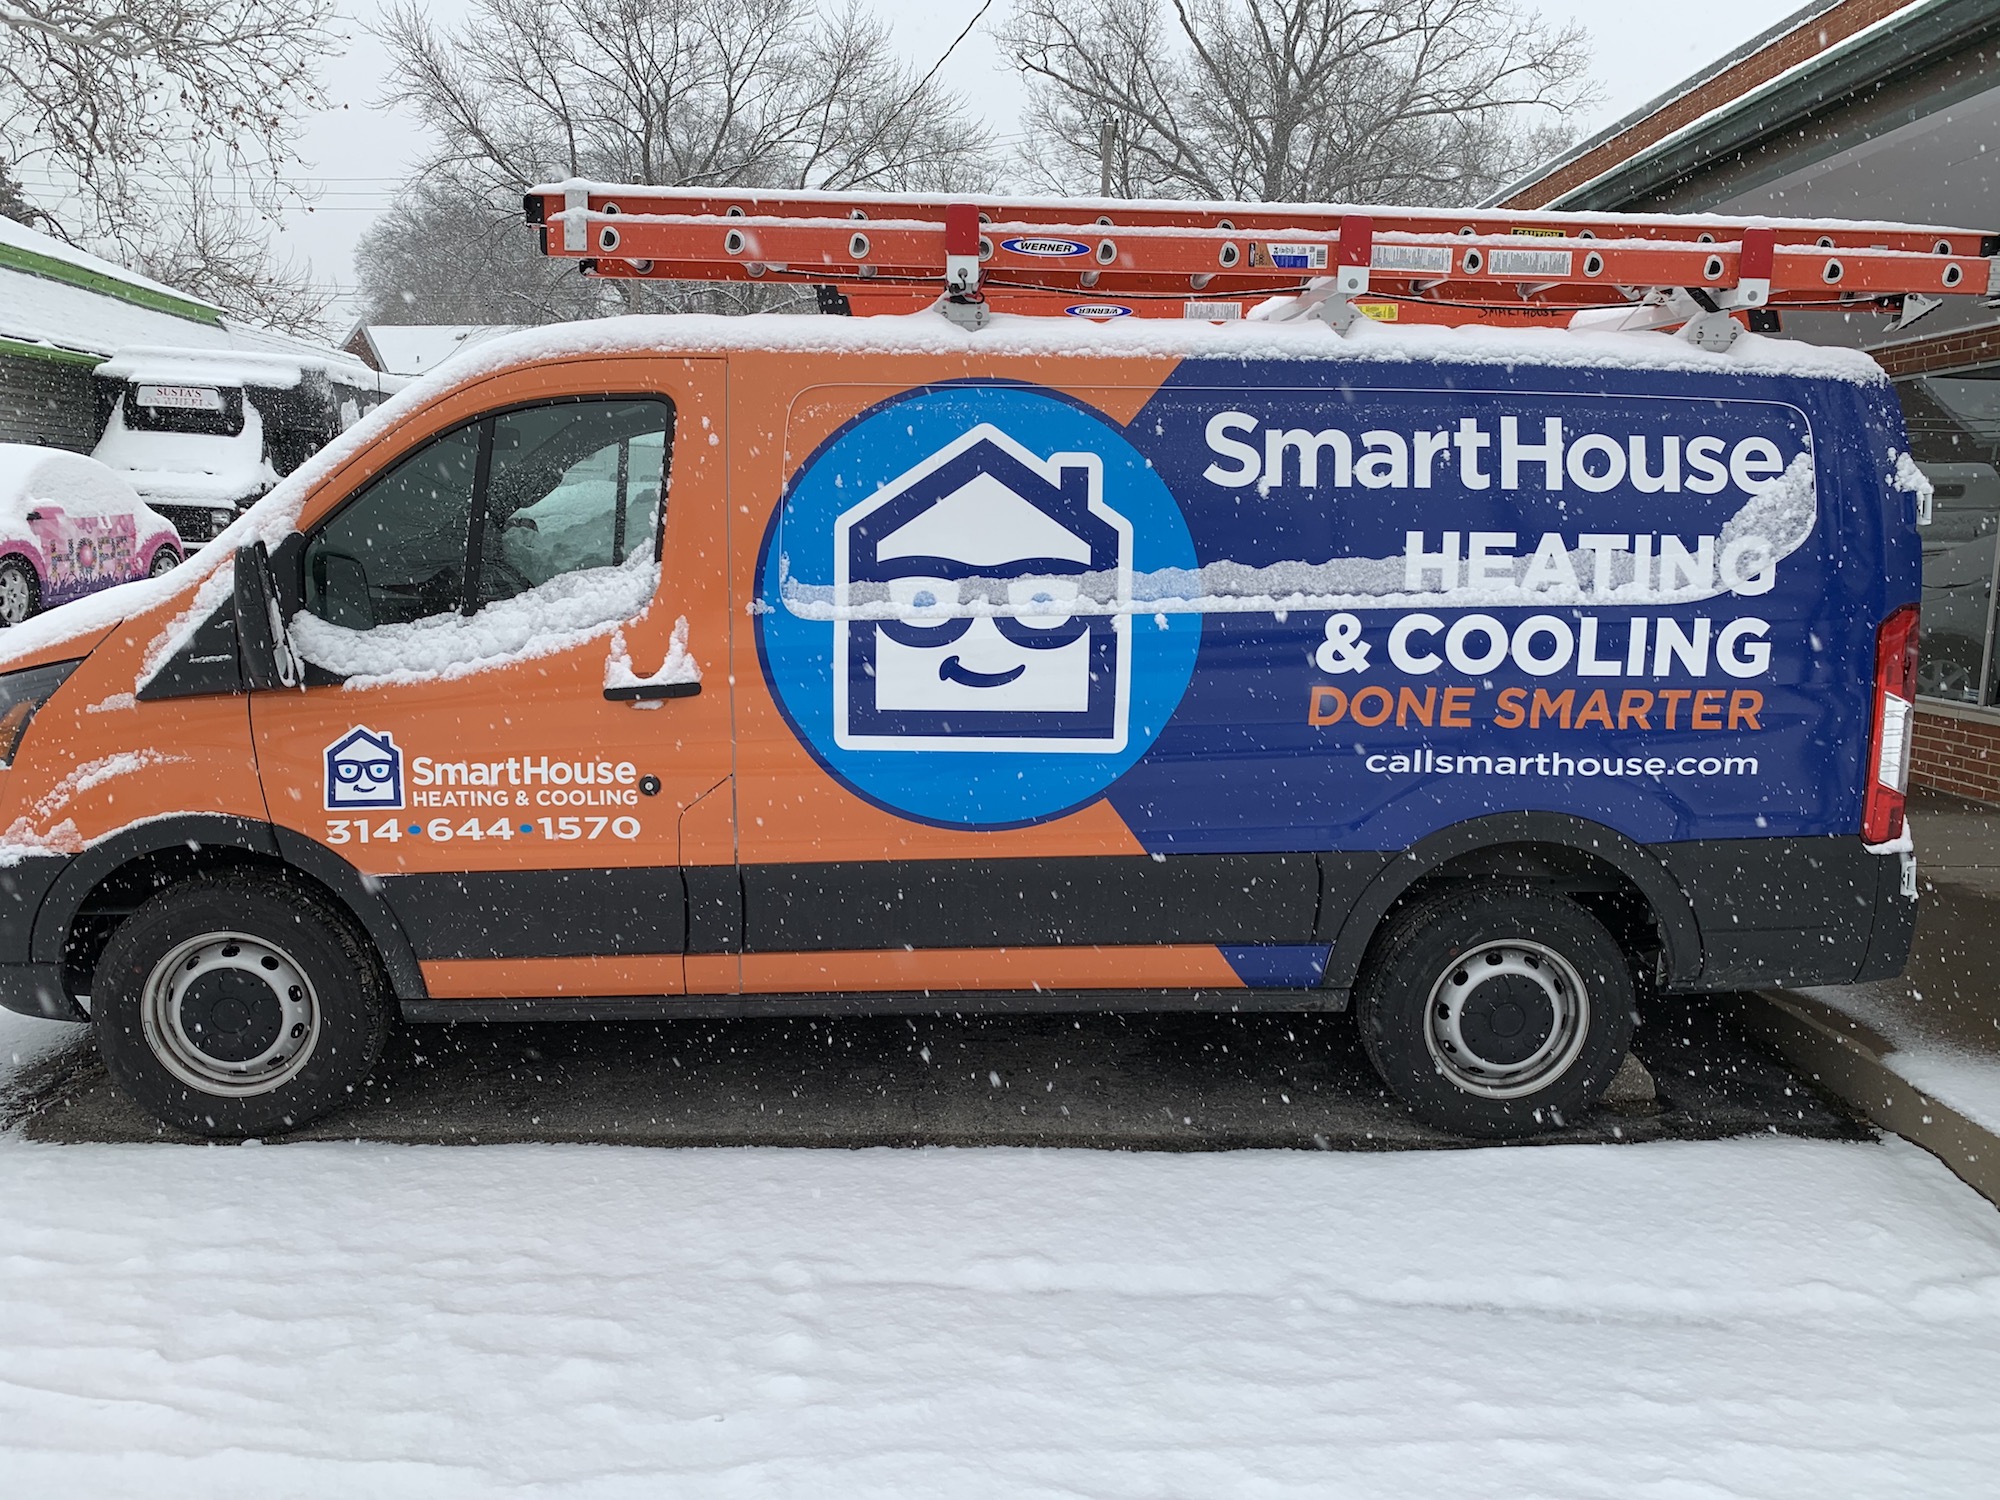 SmartHouse fleet truck in winter dusted with snow